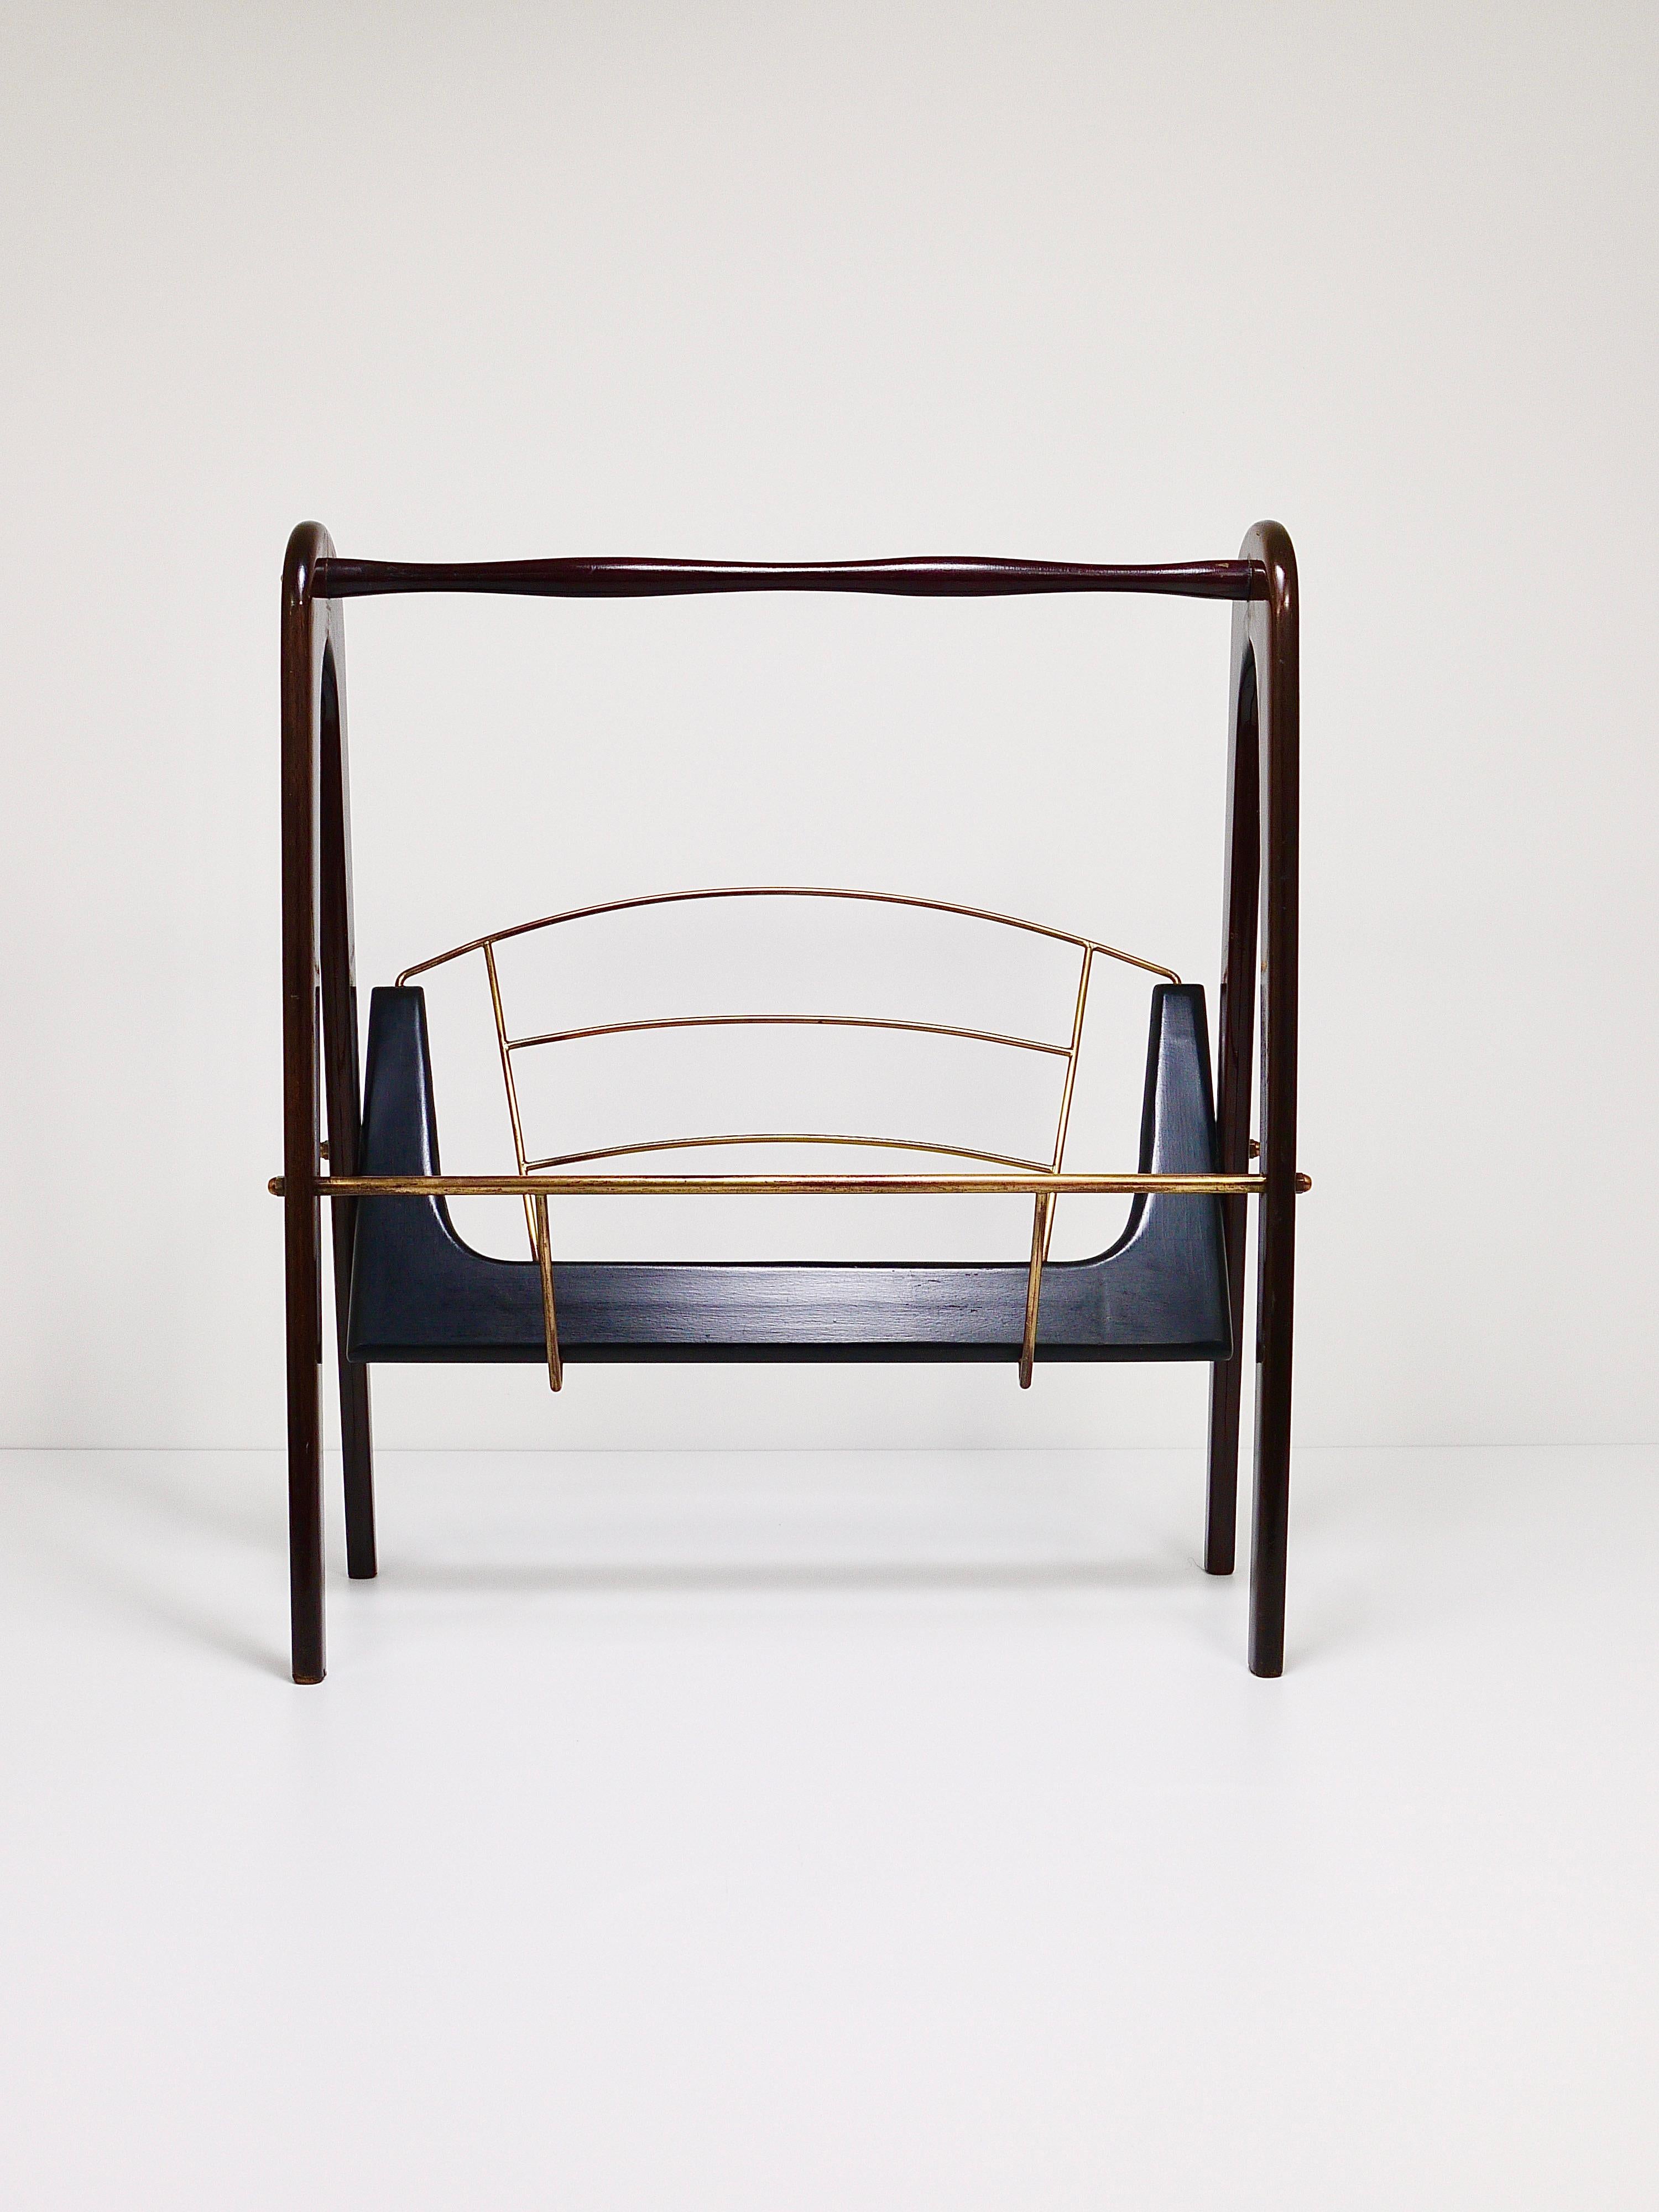 Cesare Lacca Midcentury Magazine Rack, Mahogany & Brass, Italy, 1950s For Sale 3